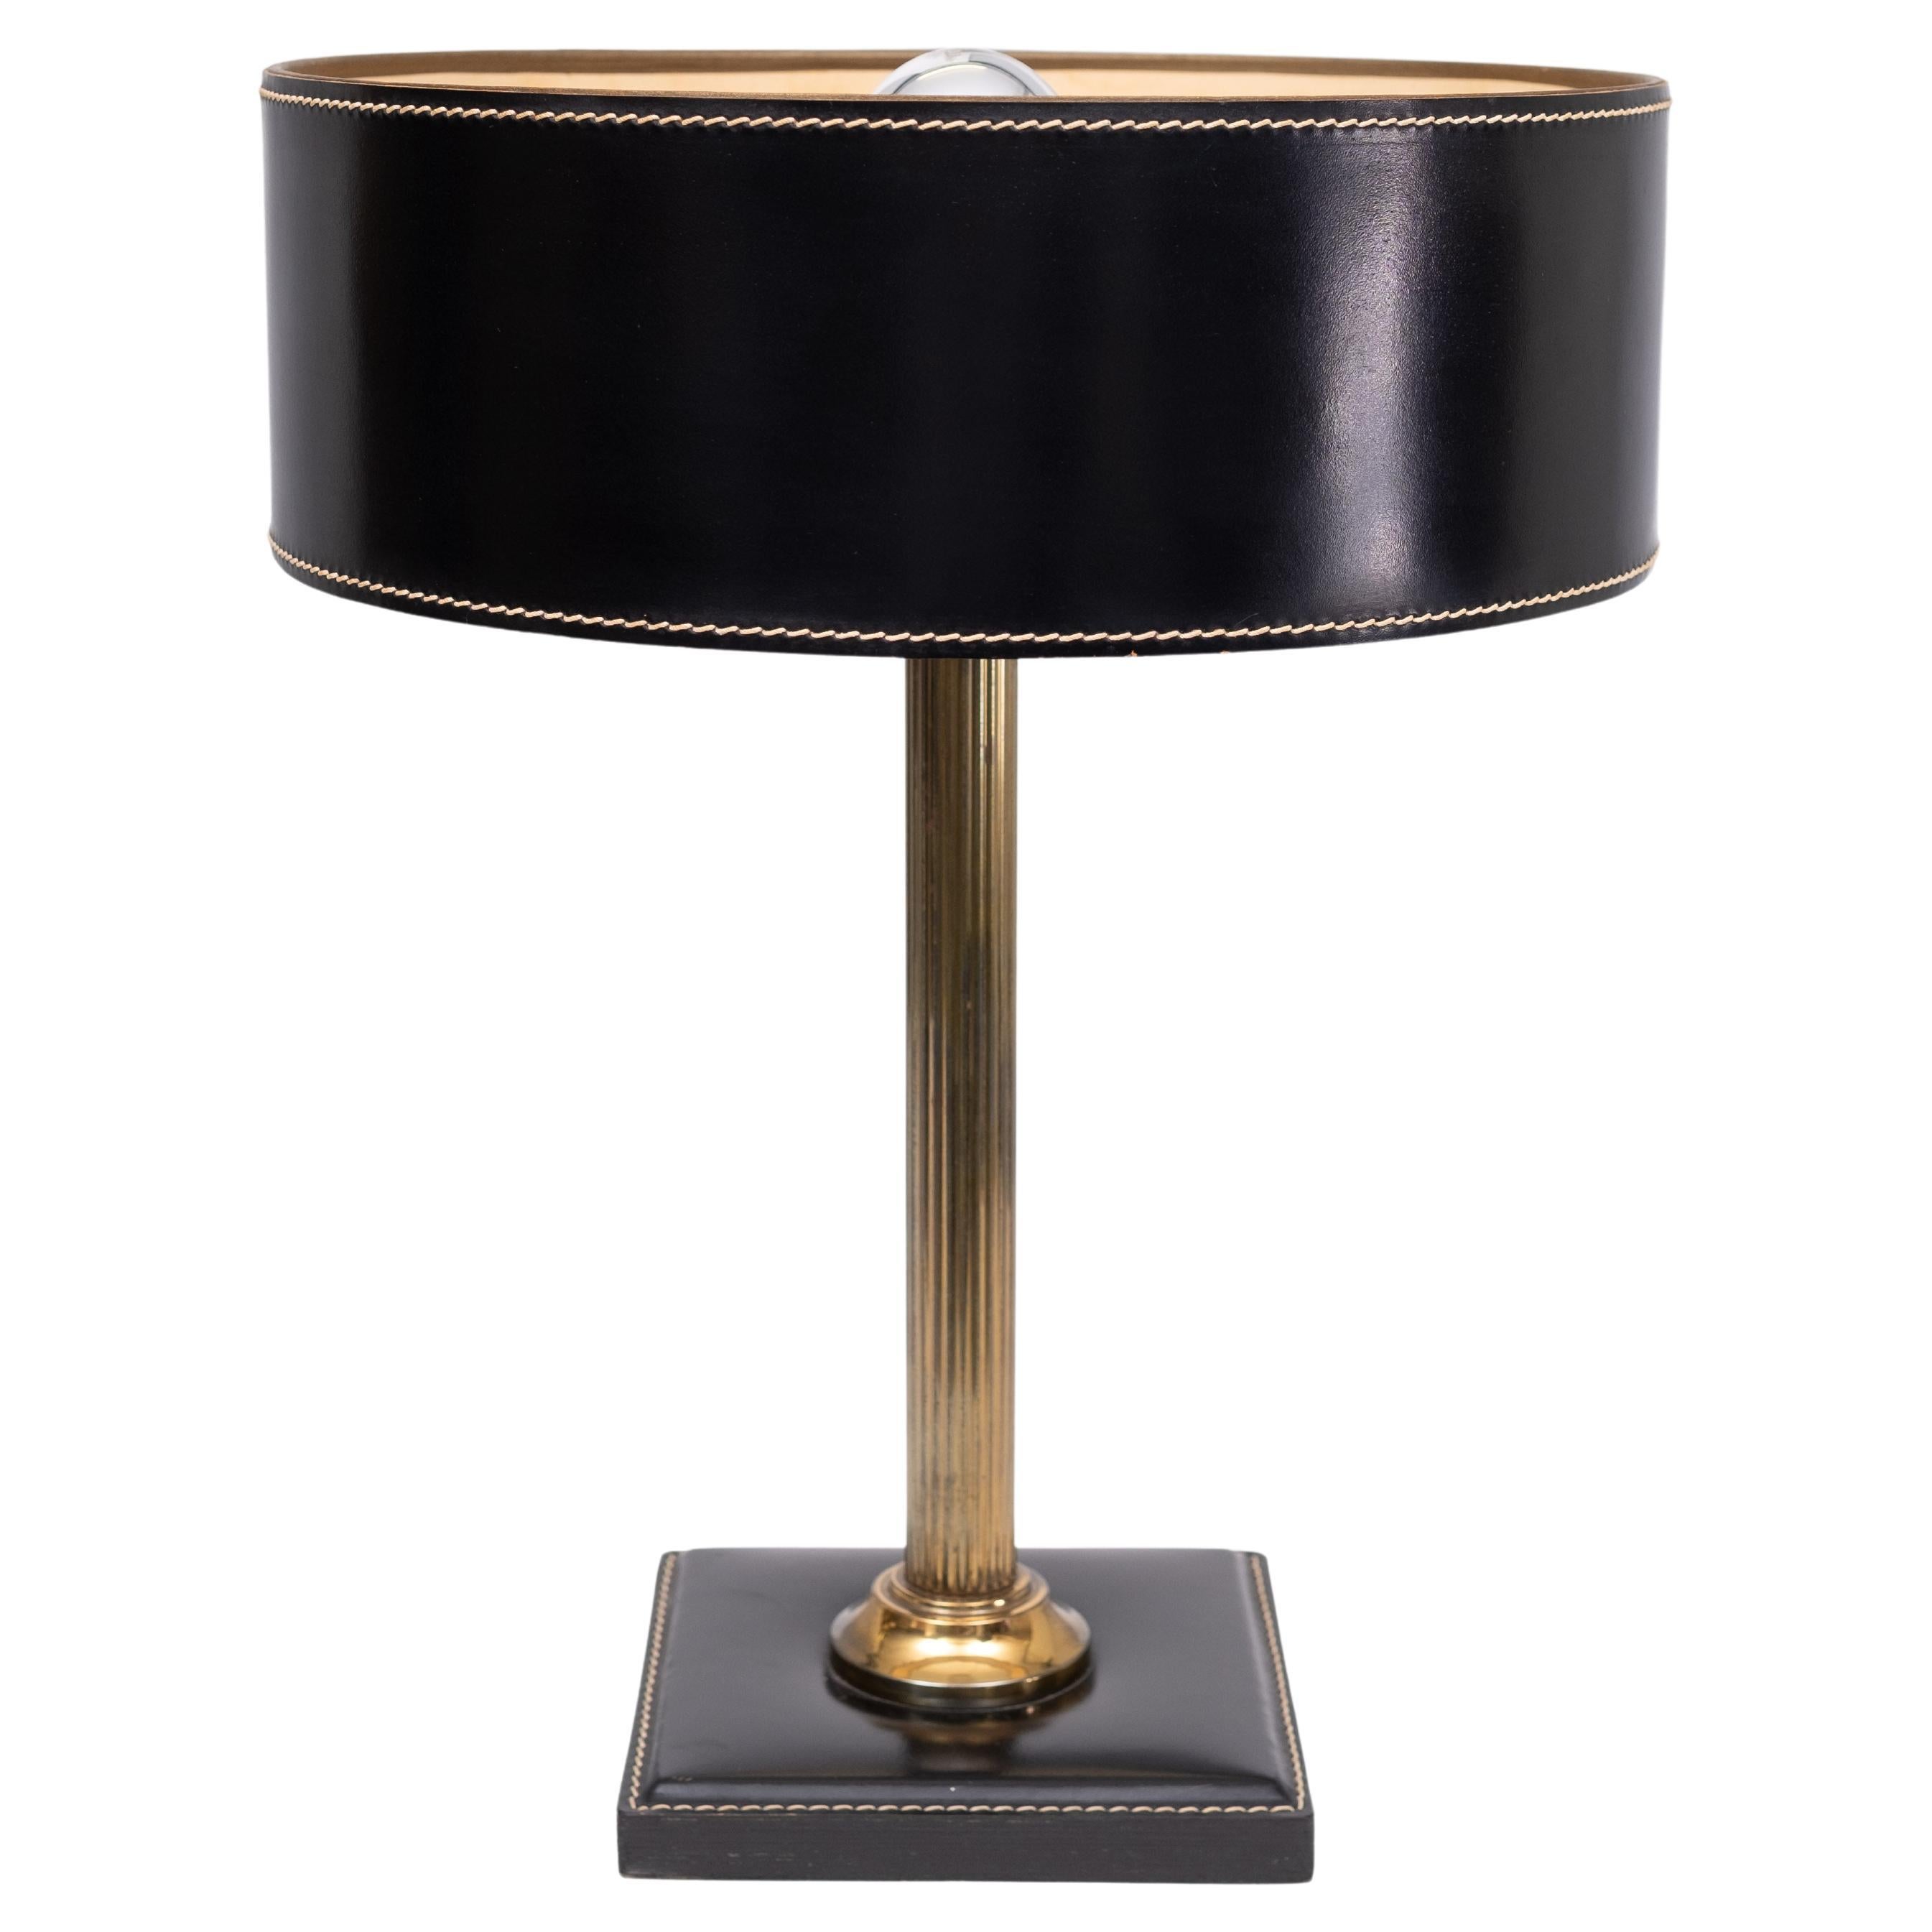 Jacques Adnet clad table lamp in Black leather, France 1960